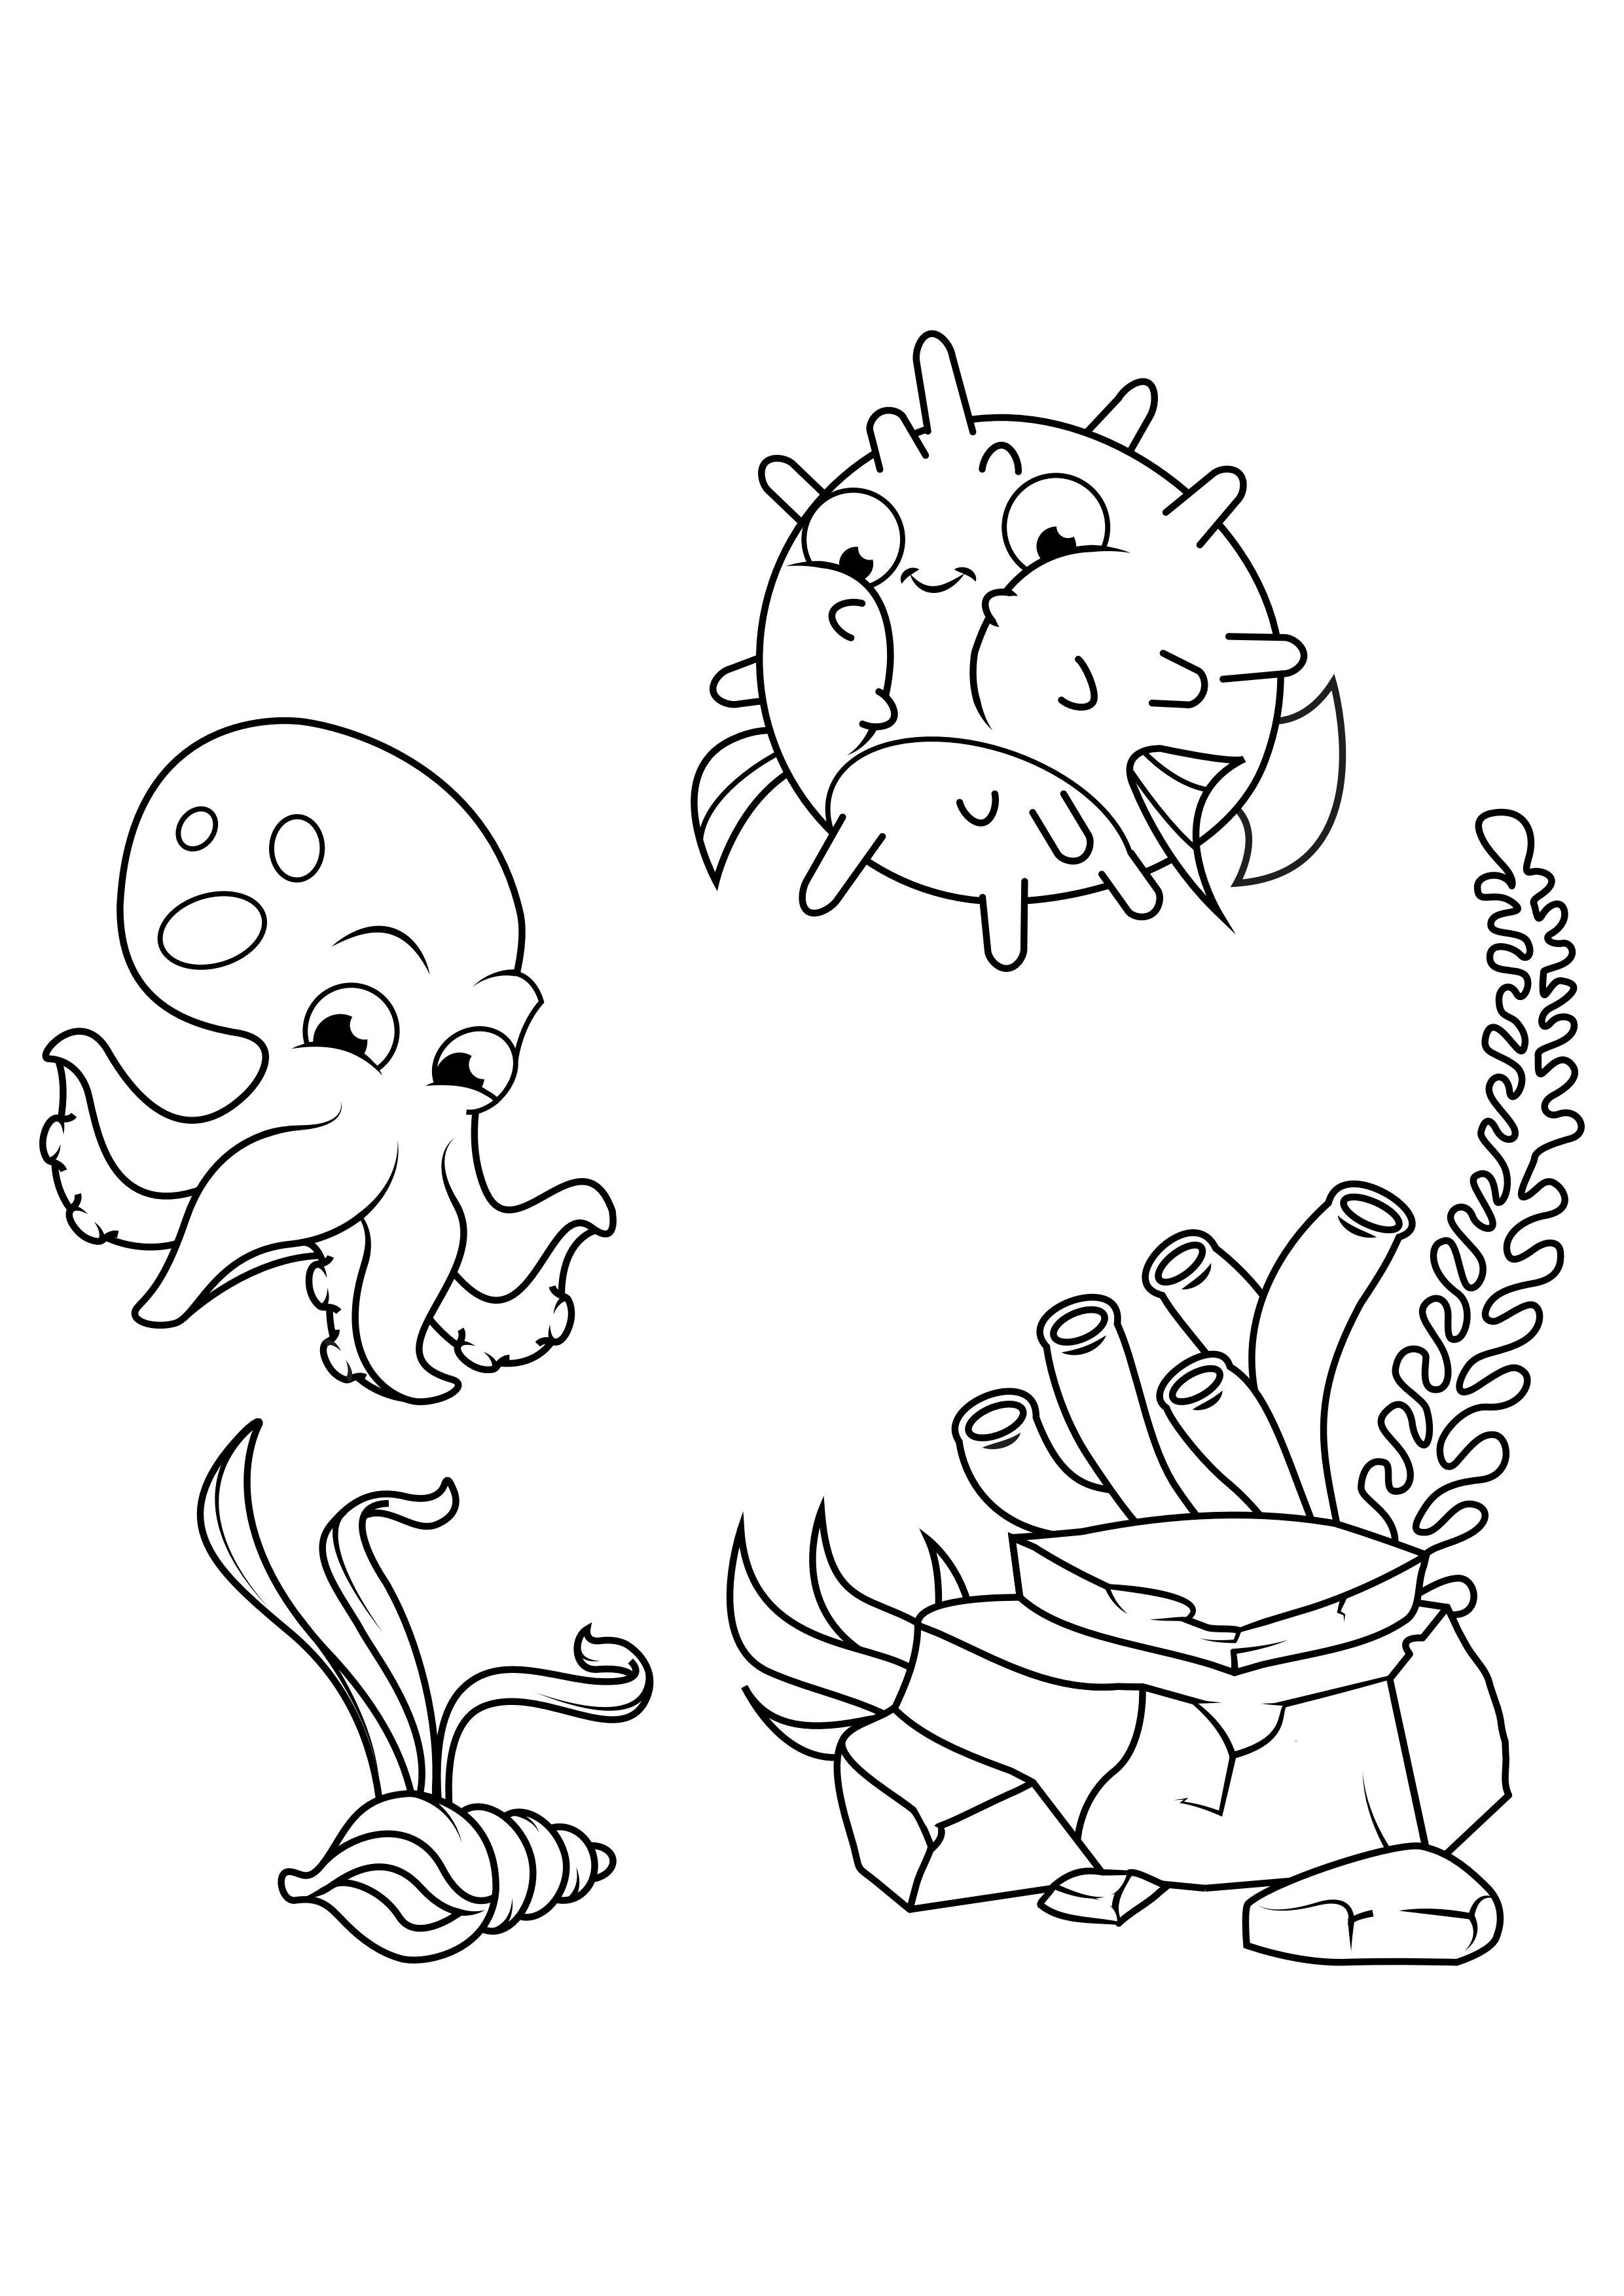 Coloring page squid and puffer fish swim around